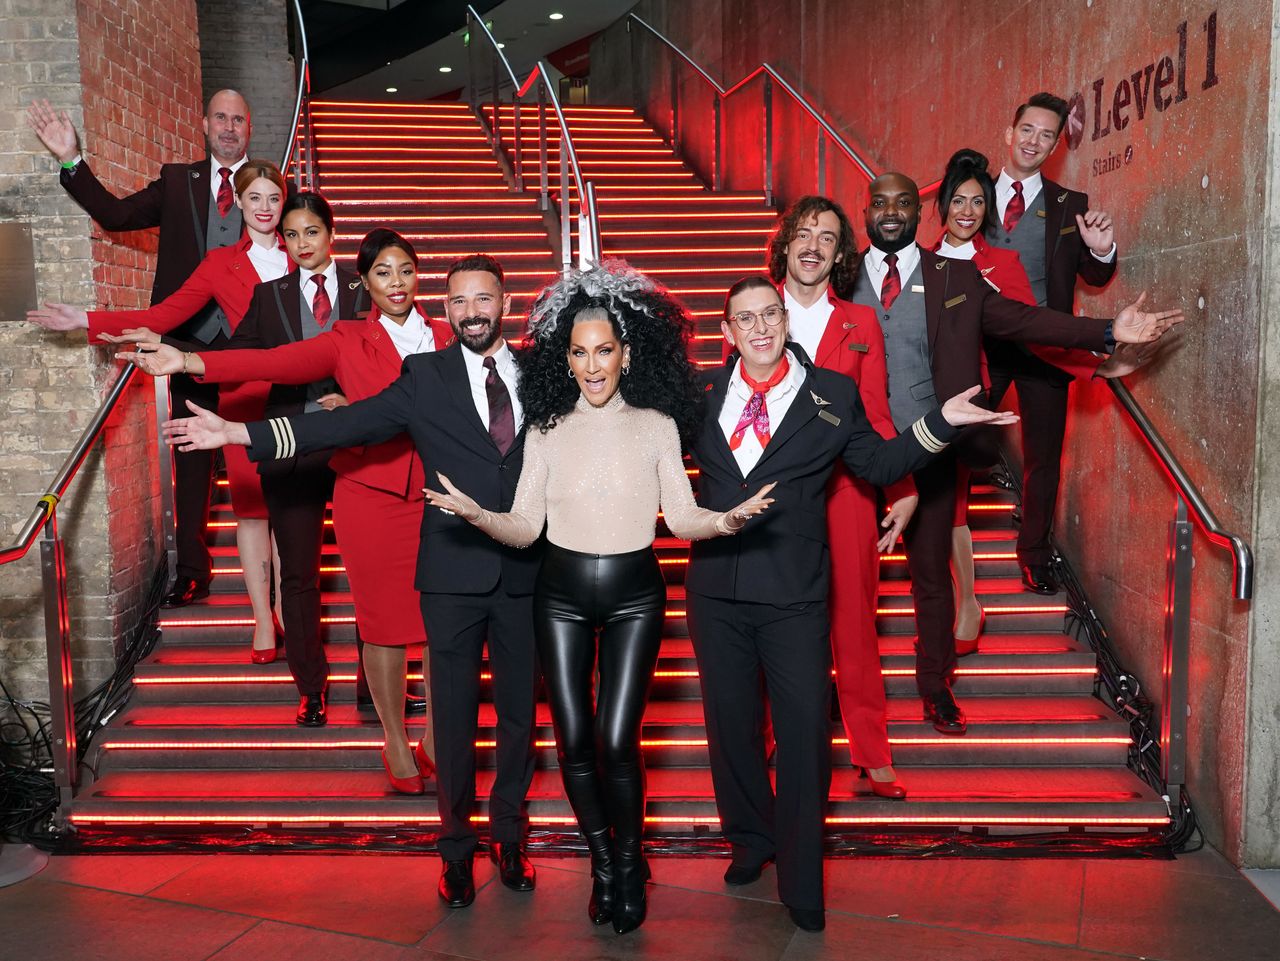 Michelle posing with Virgin Atlantic crew members at the Attitude Awards